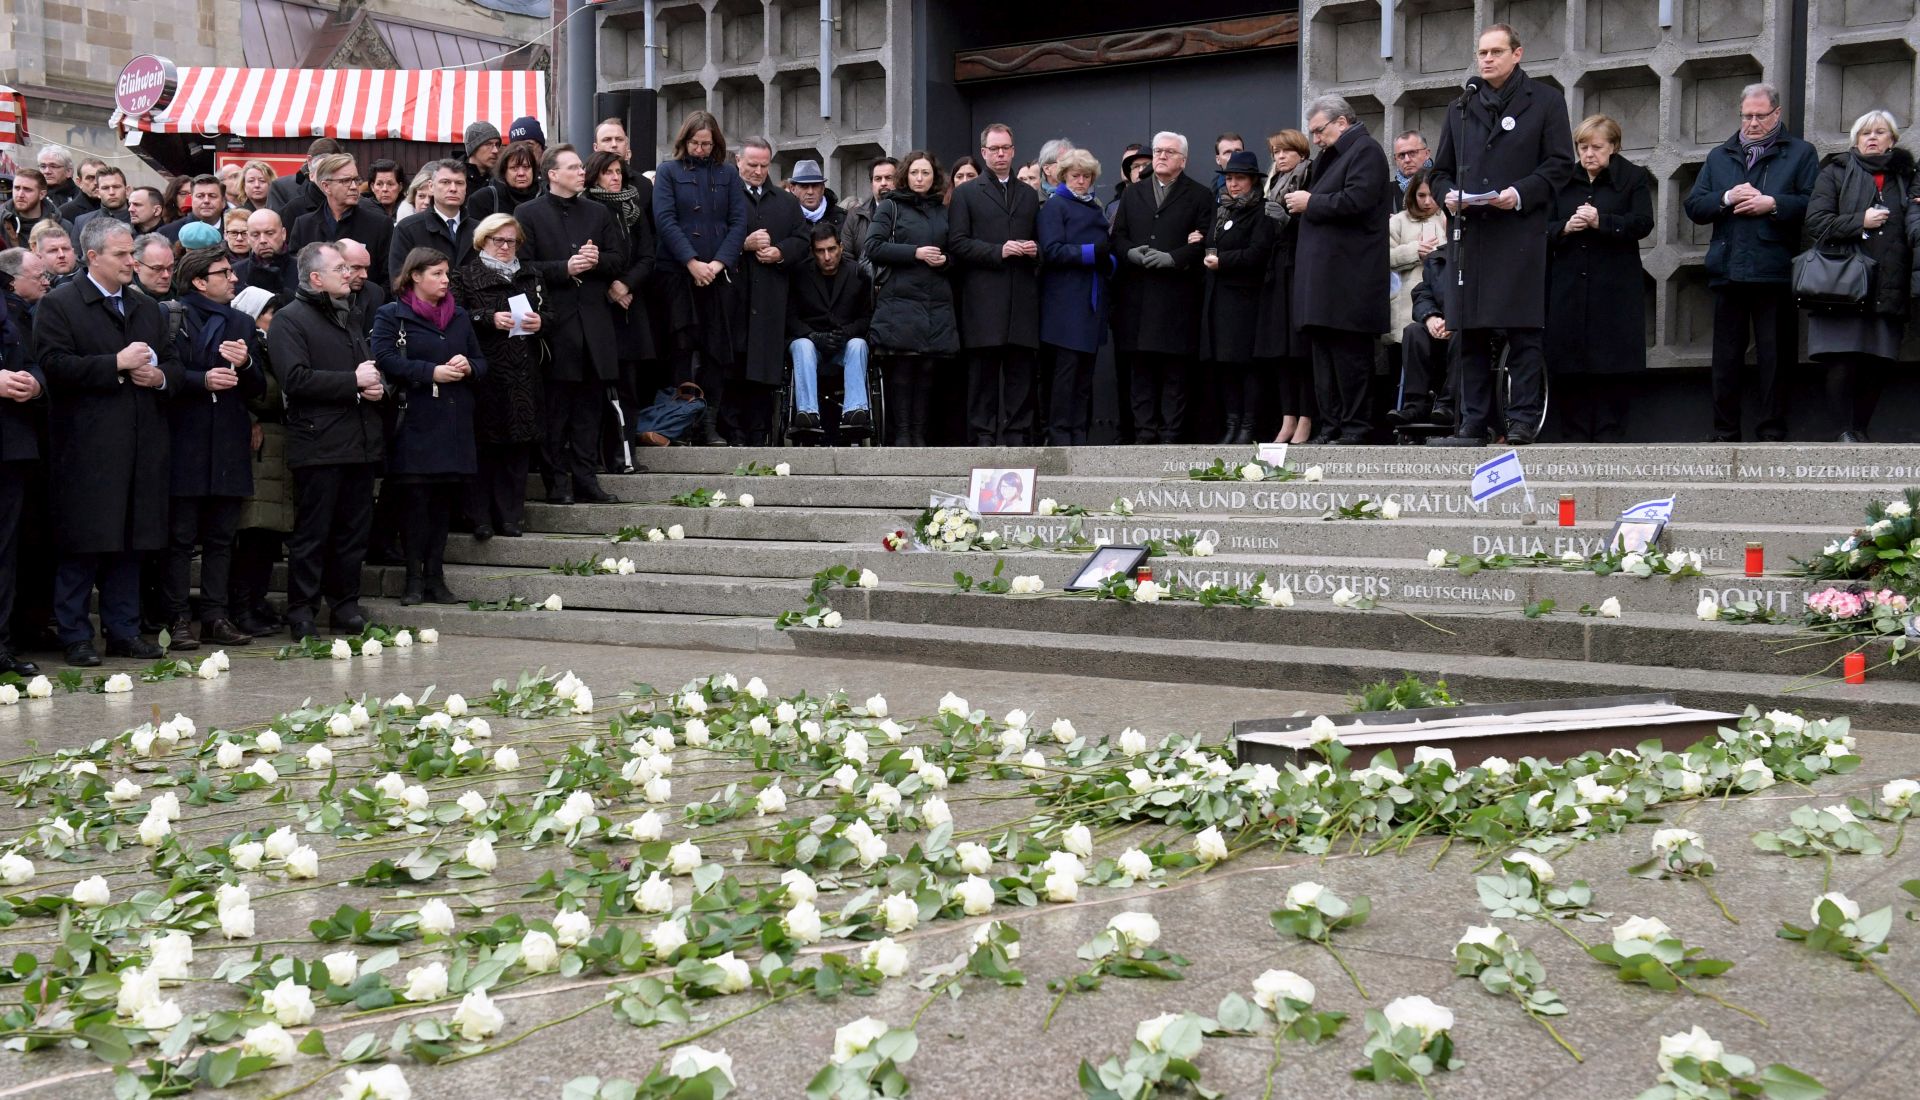 epa06398328 Mourners attend the commemorative events marking the first anniversary of the terrorist attack on Christmas market at Breitscheidplatz in Berlin, Germany, 19 December 2017. The Breitscheidplatz square in Berlin on the same day in 2016 was the target of a terror attack in which 12 people lost their lives and around 50 others were injured, when a truck driven by Anis Amri plowed through the Christmas market.  EPA/CLEMENS BILAN